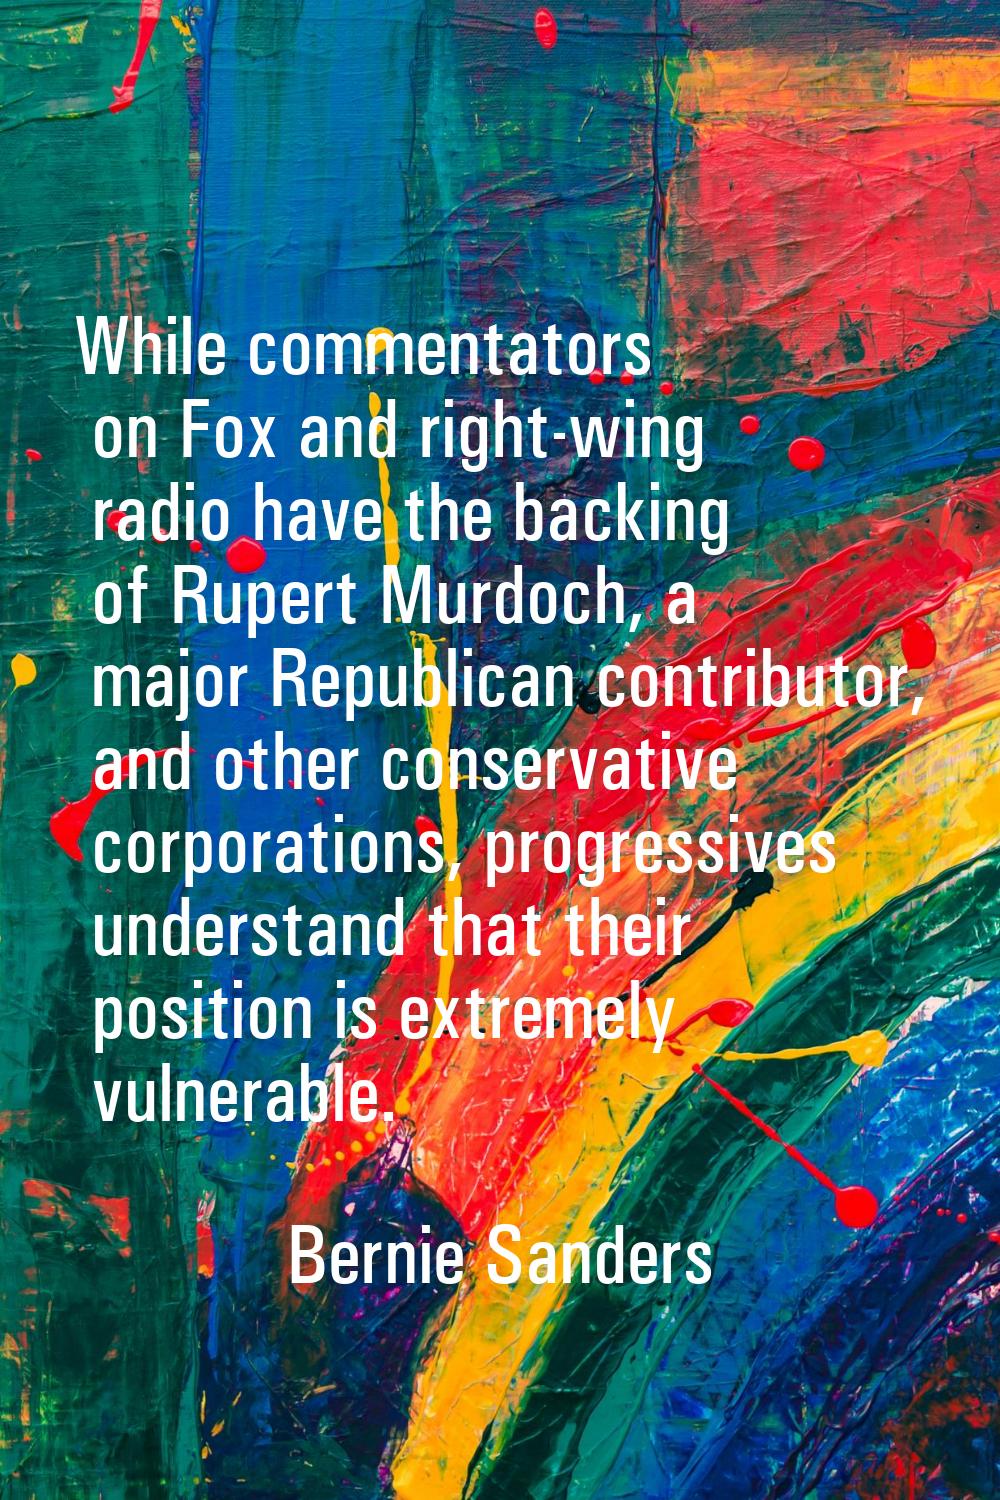 While commentators on Fox and right-wing radio have the backing of Rupert Murdoch, a major Republic